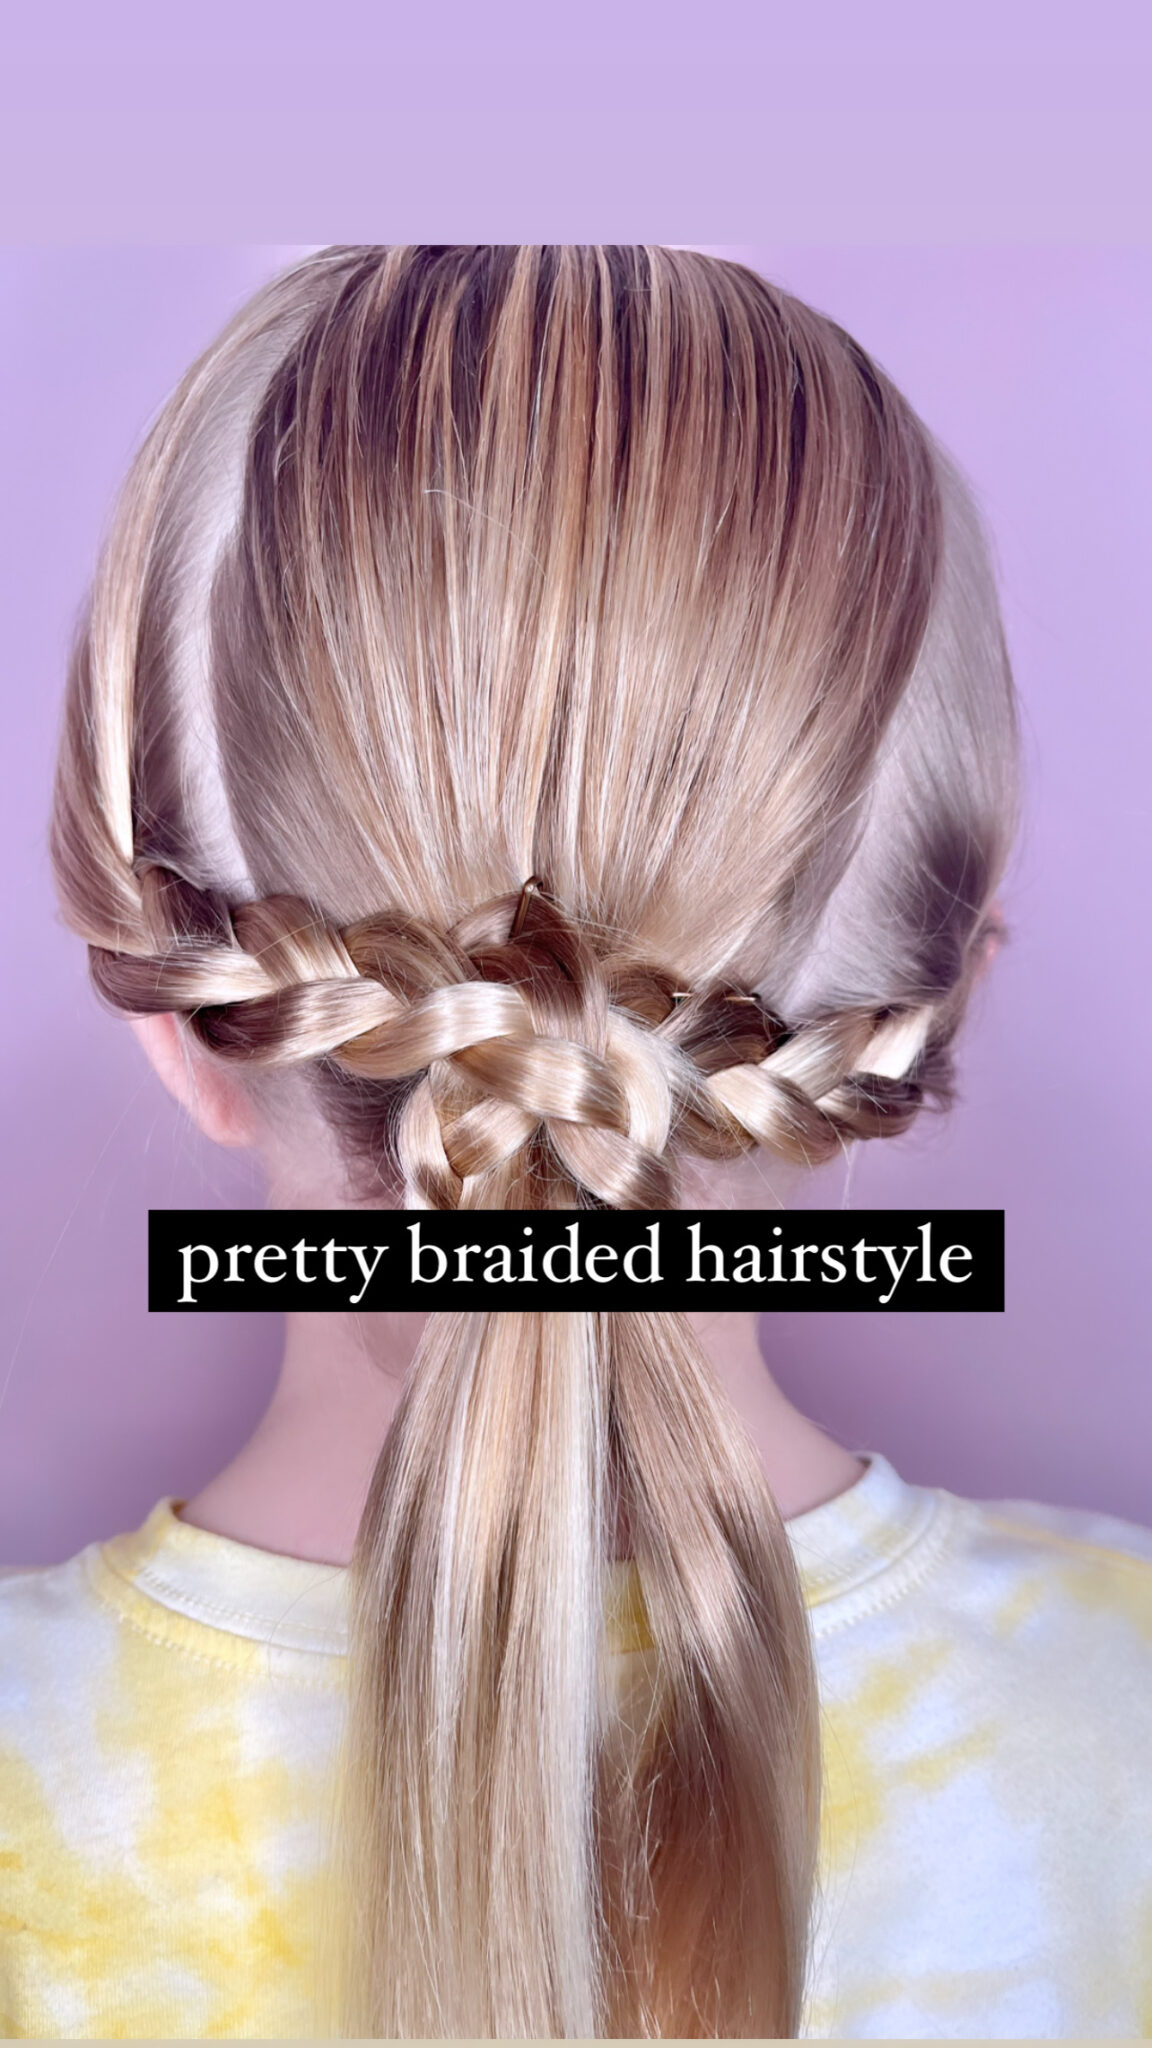 Hairstyles for Teen Girls - Stylish Life for Moms